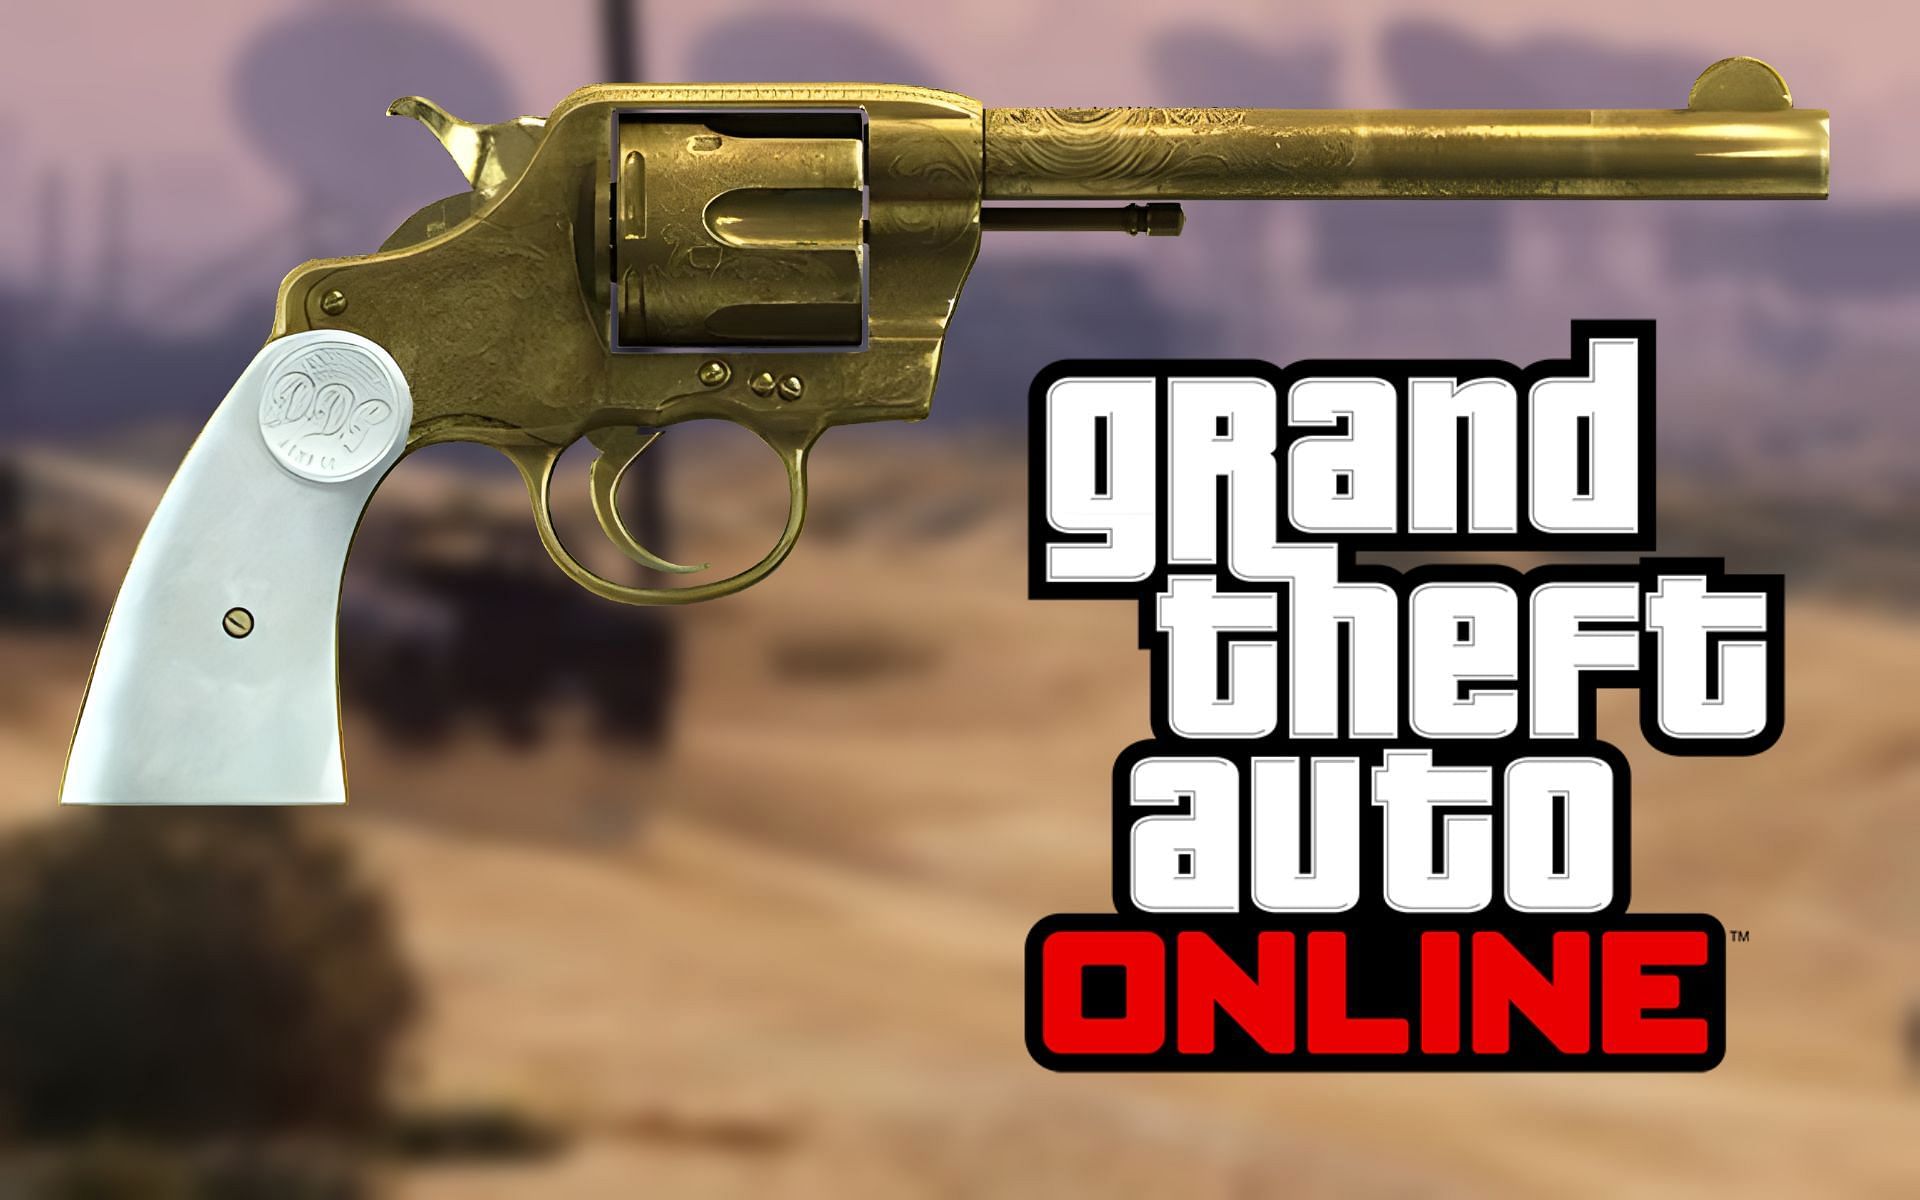 The Double-Action Revolver&#039;s main purpose is the one-time $250,000 bonus it offers to GTA Online players (Image via Rockstar Games)